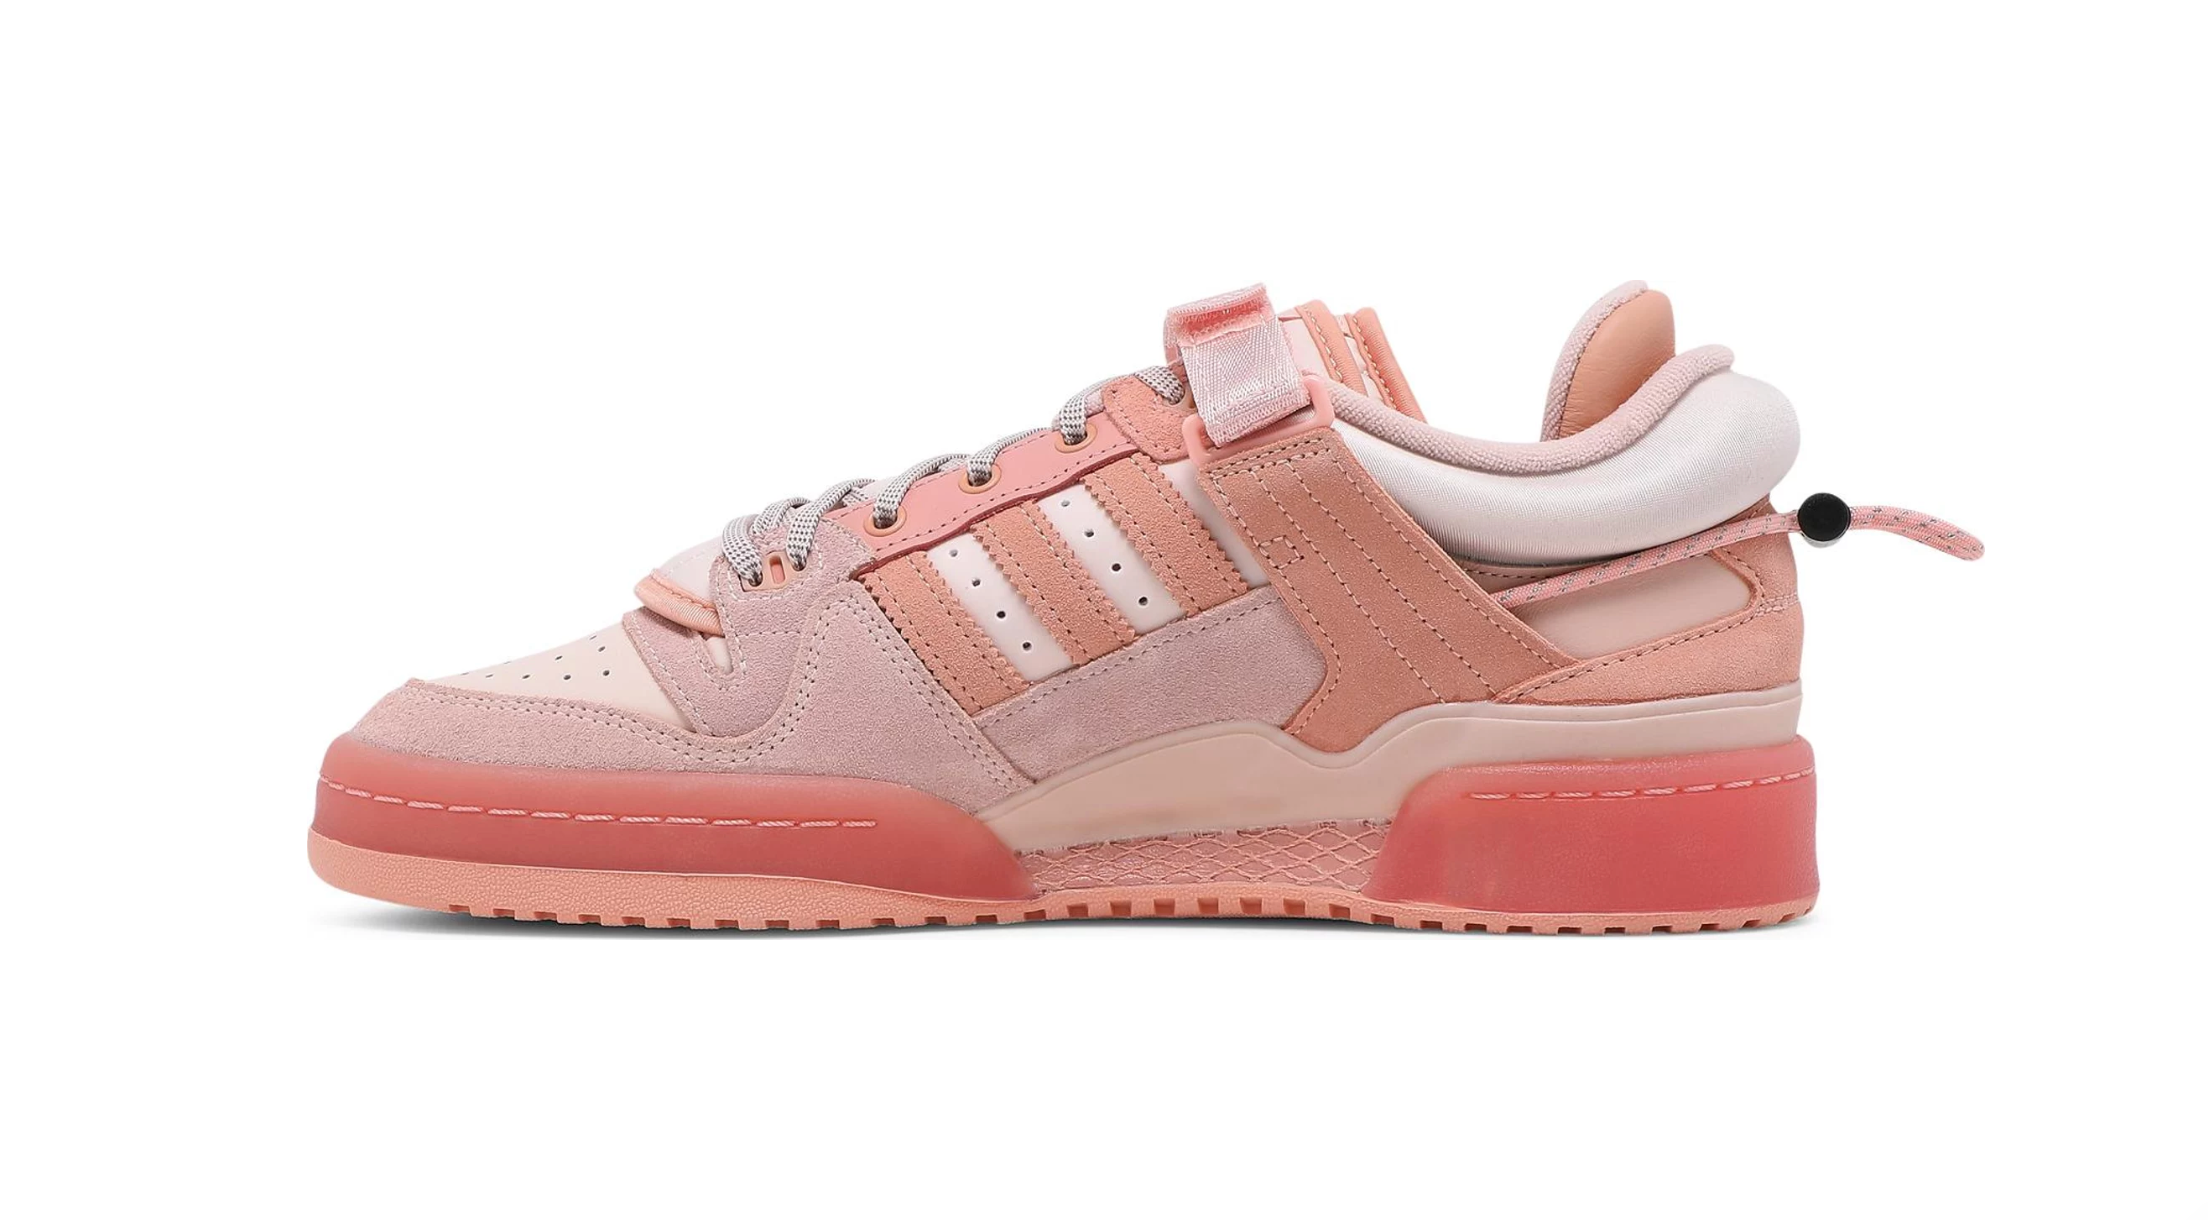 ADIDAS FORUM LOW BAD BUNNY PINK EASTER EGG